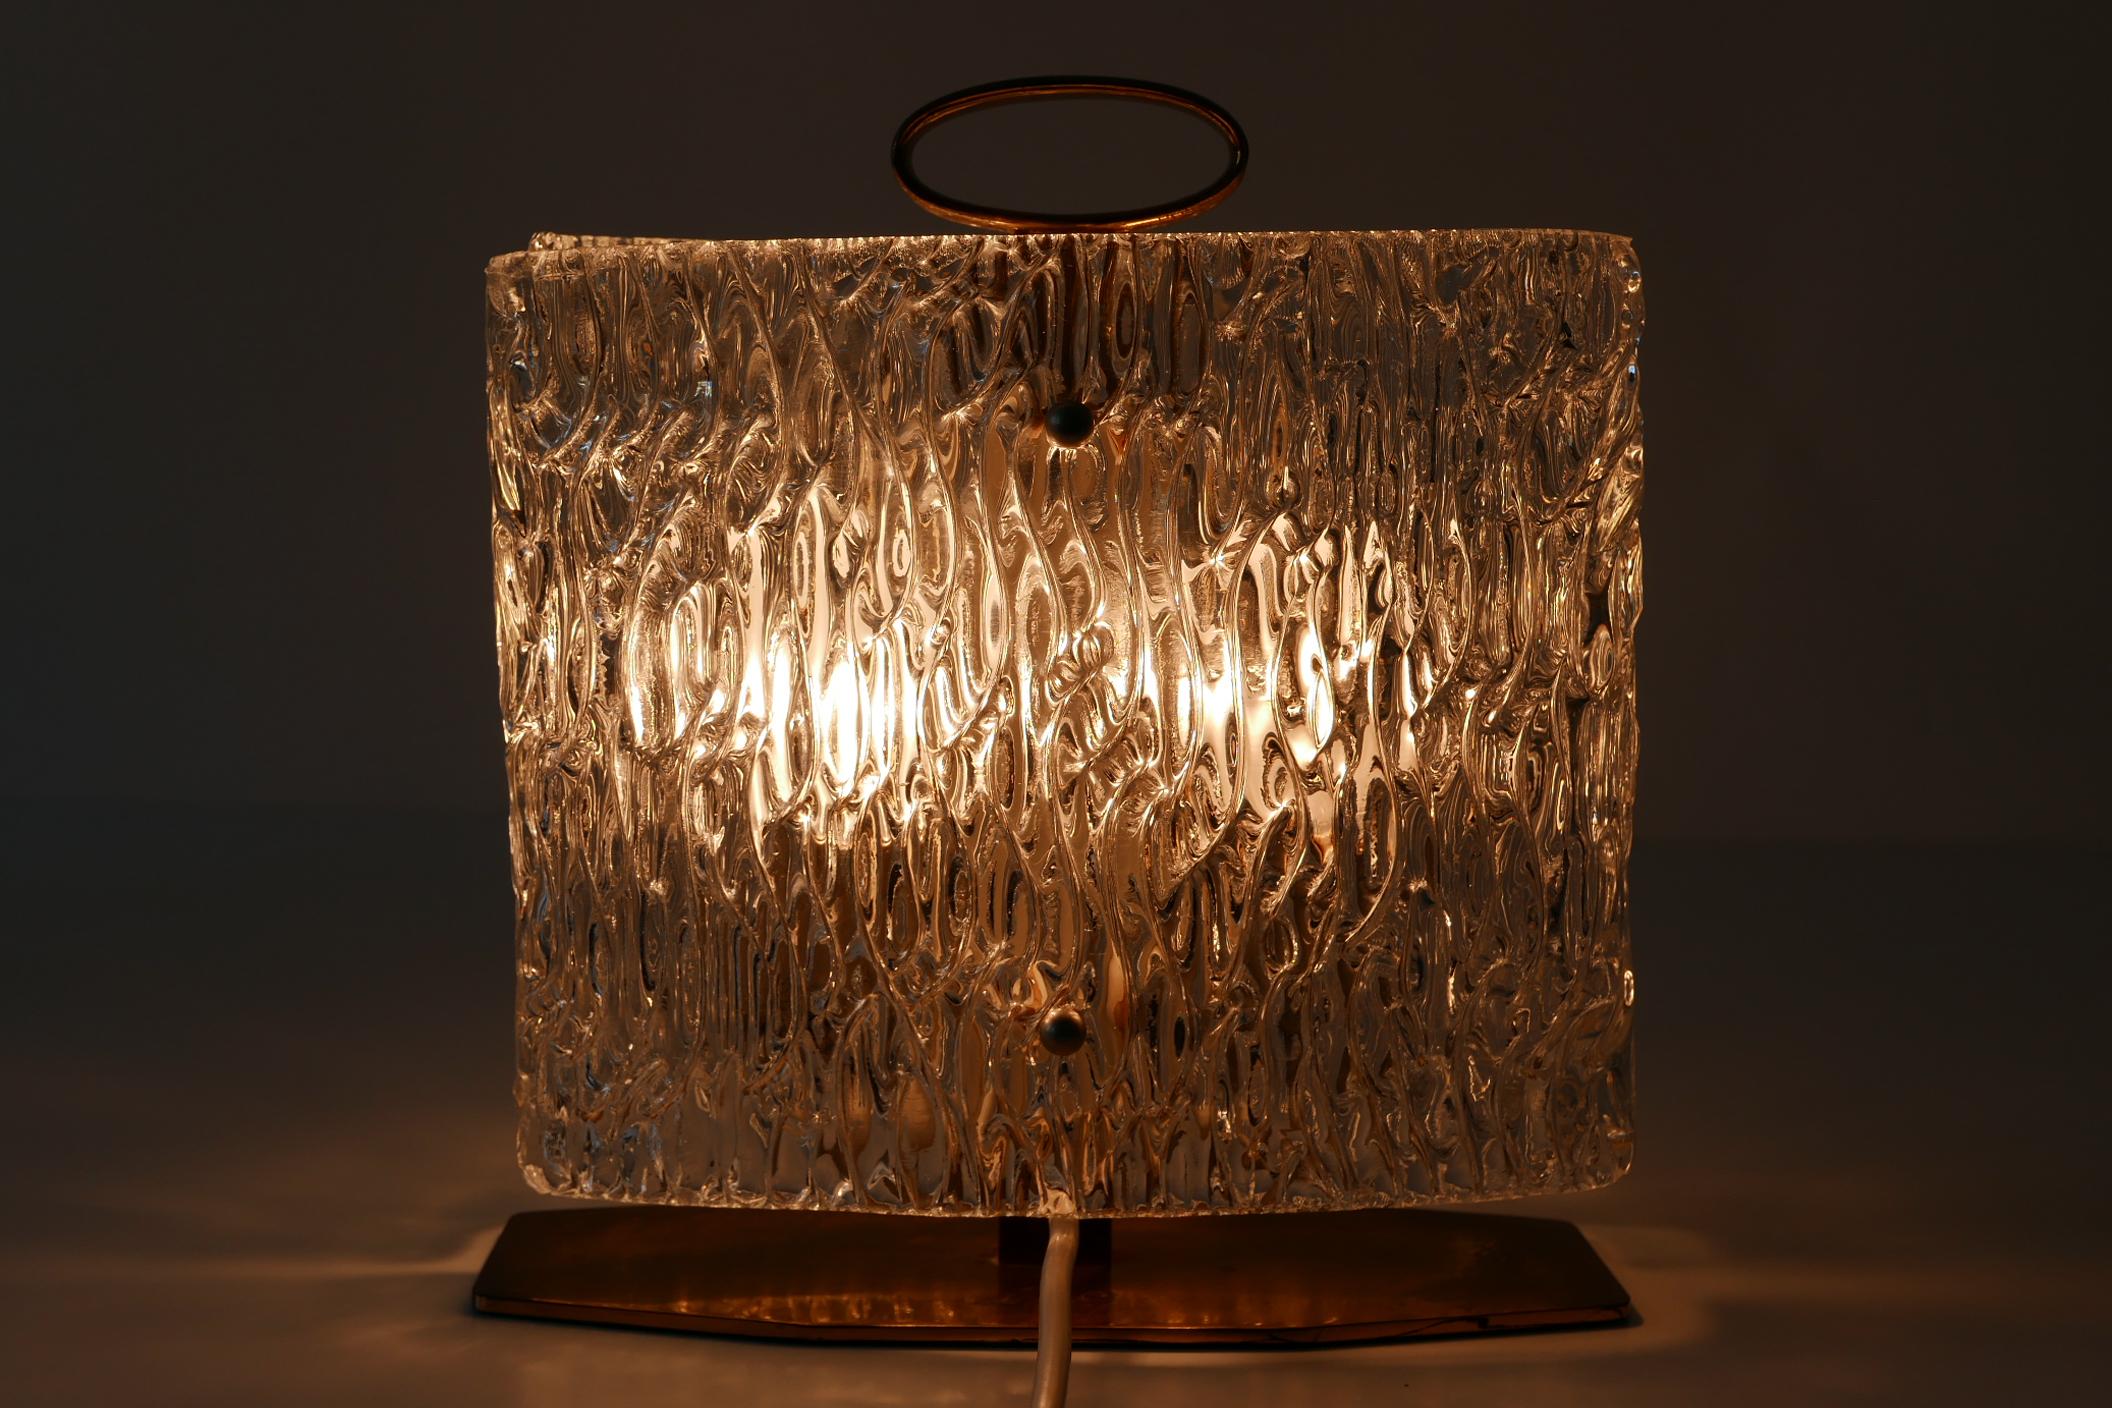 Exceptional Mid-Century Modern Table Lamp with Ice Glass Shade, 1950s, Italy For Sale 12